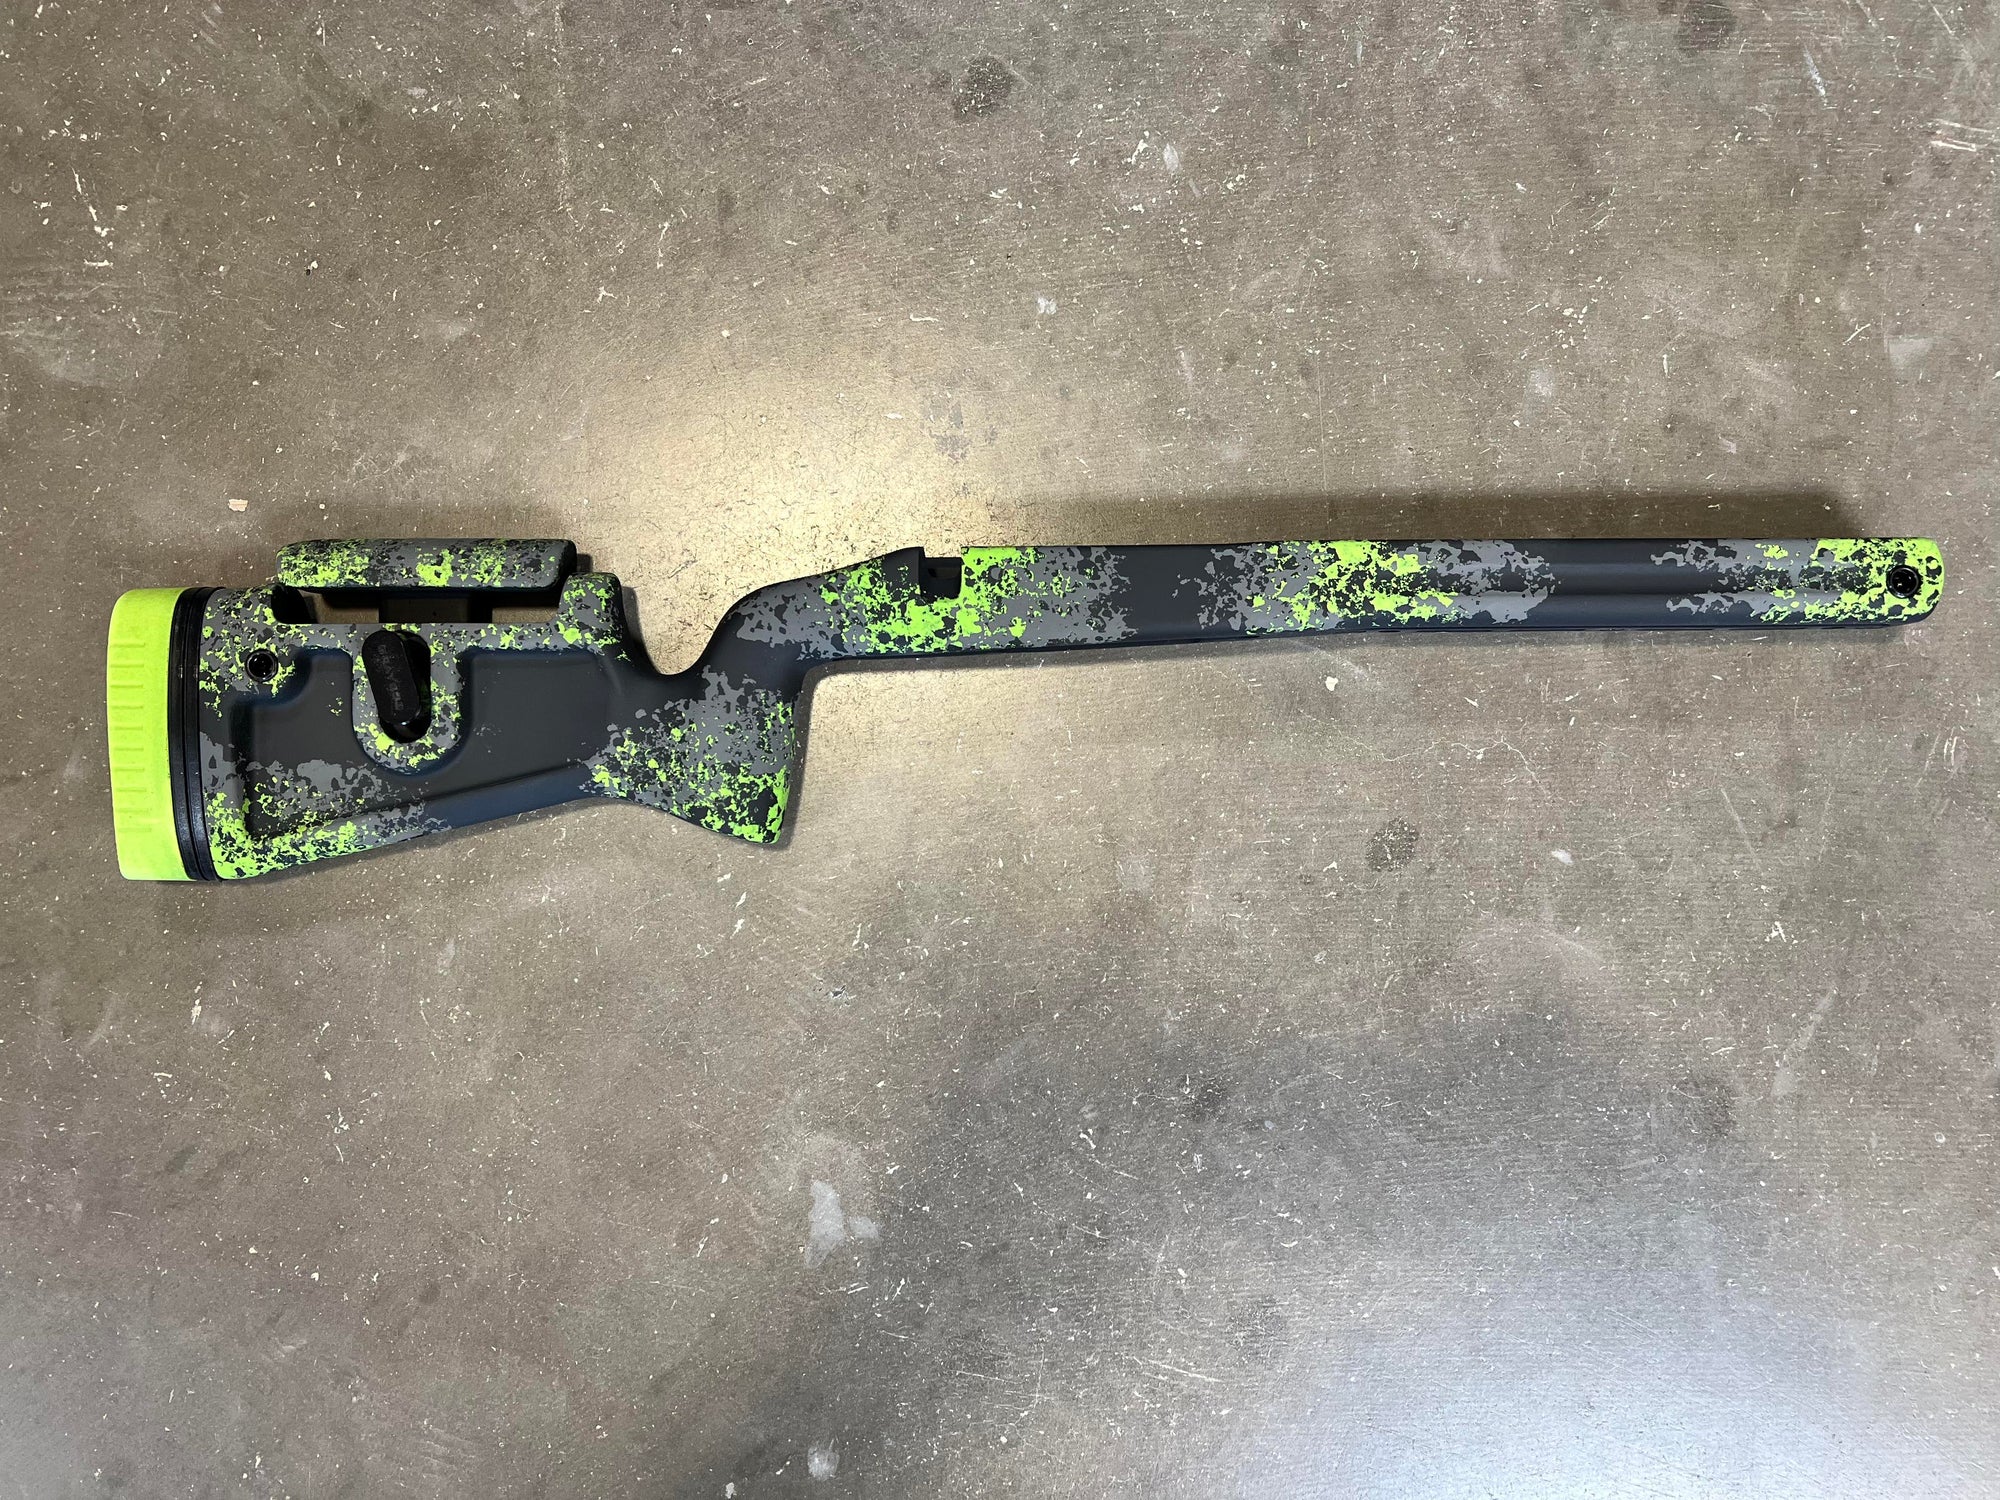 Phoenix 2 - Right Hand Rem 700 or 700 clone long action, M5, Fits any barrel.  Painted Zombie Green Camo w/ Zombie Green G Lite Recoil Pad